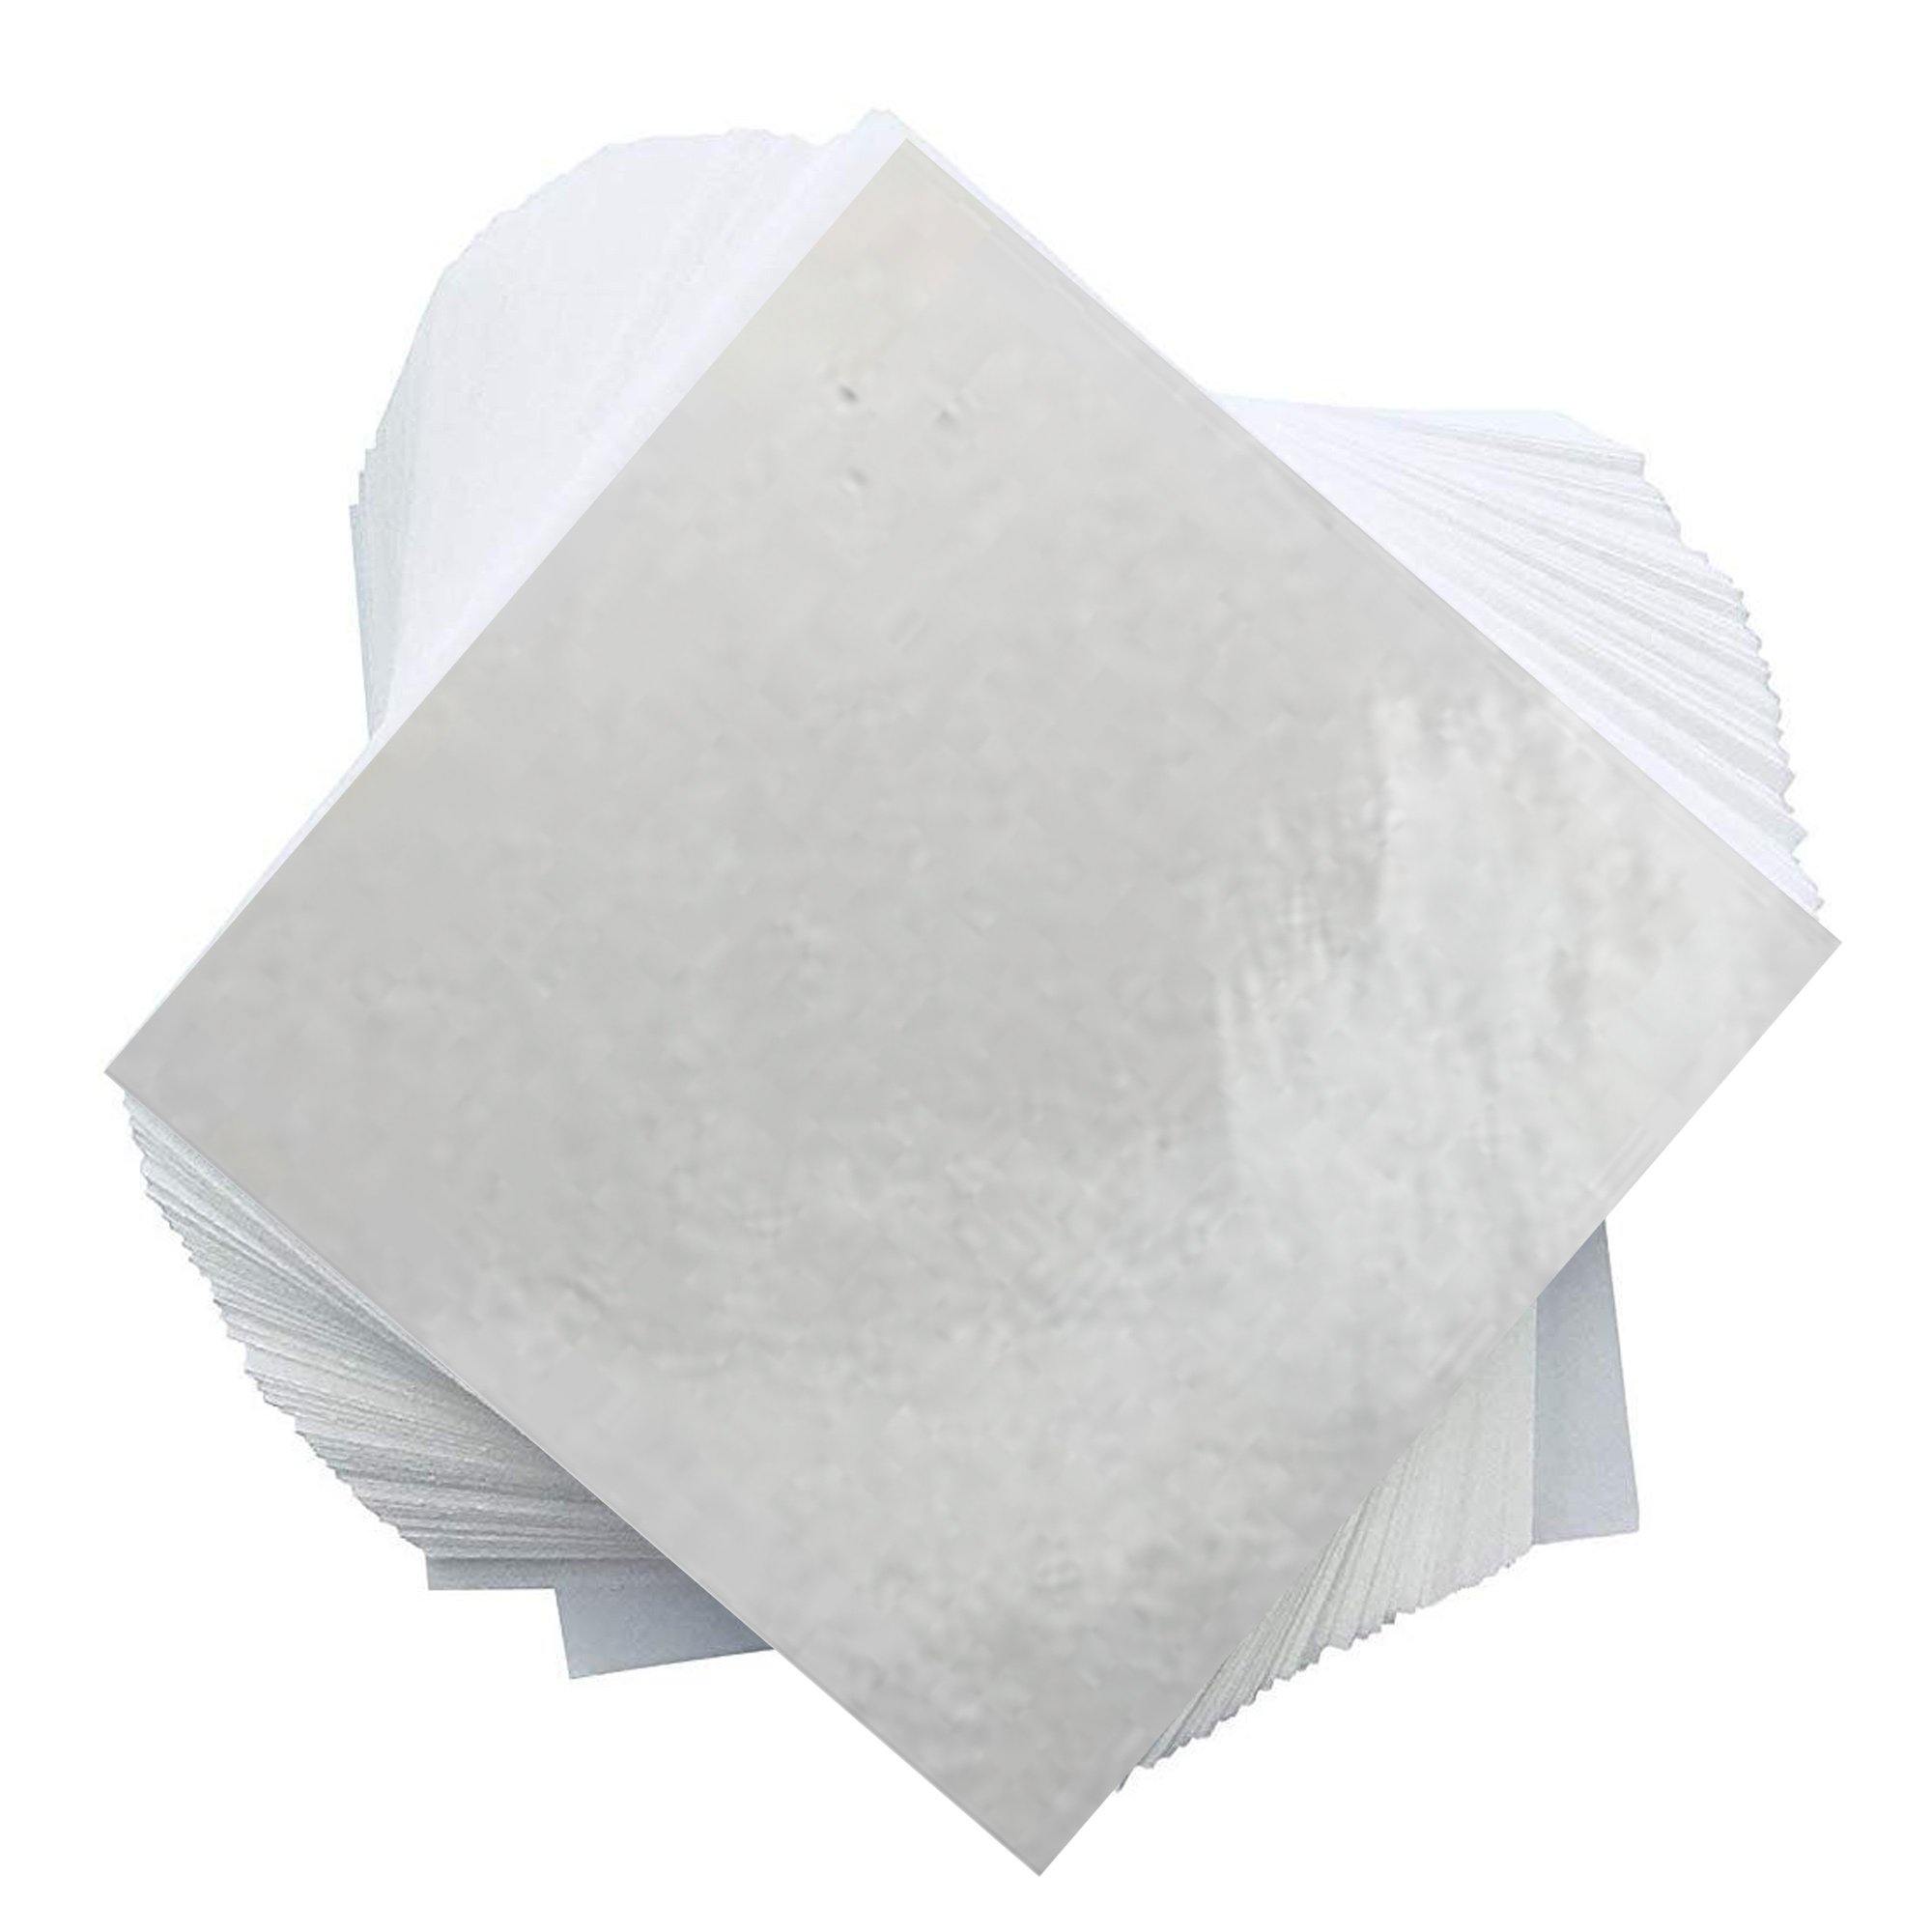  Rzam Rosin Parchment Paper, Super Thick and Slick, 6 X 12, 100 Sheets